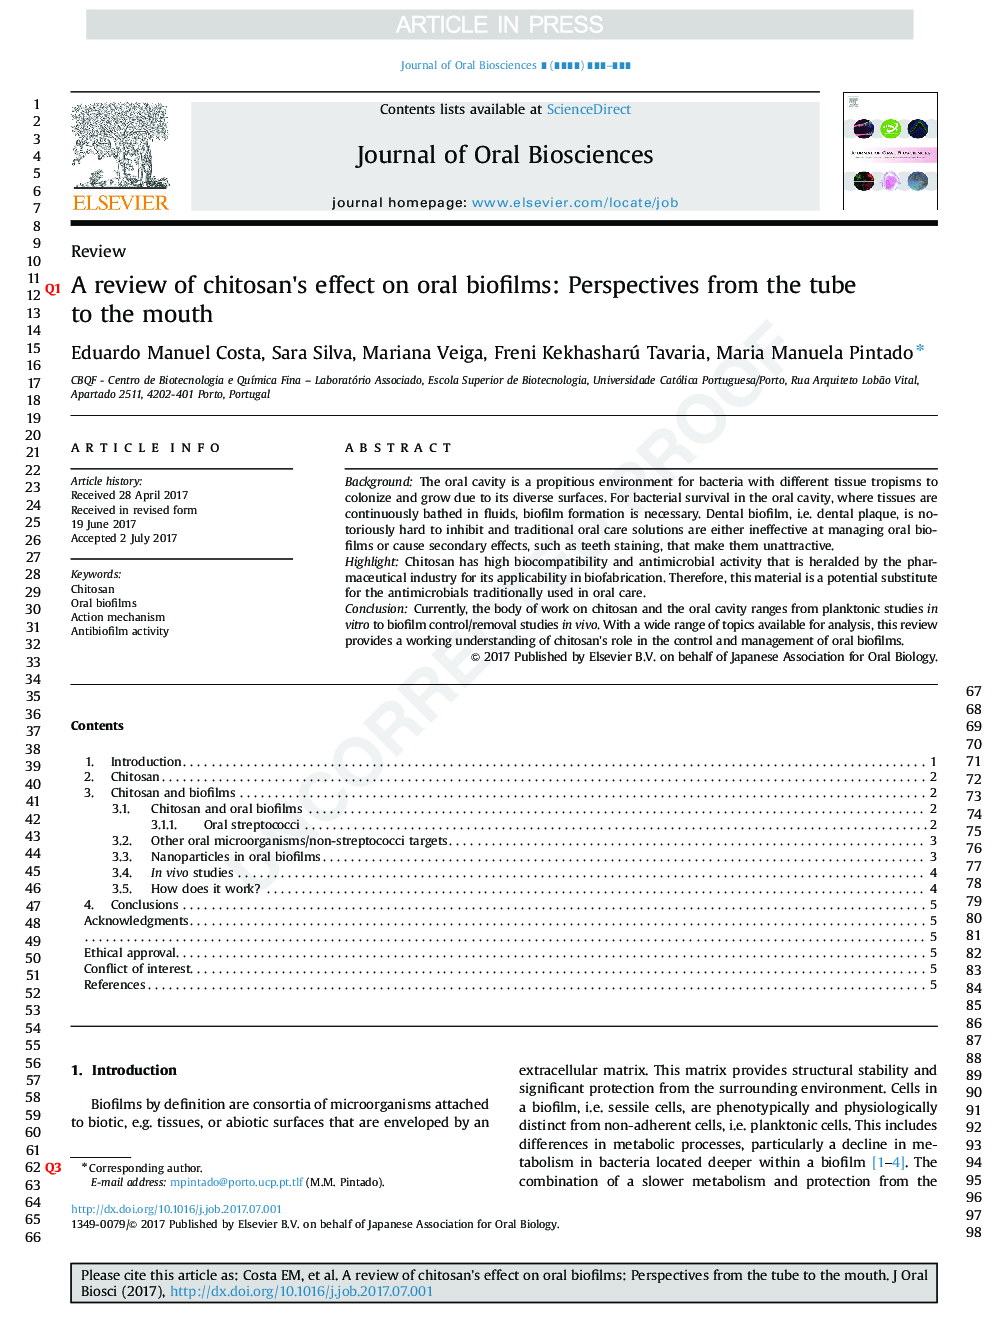 A review of chitosan's effect on oral biofilms: Perspectives from the tube to the mouth